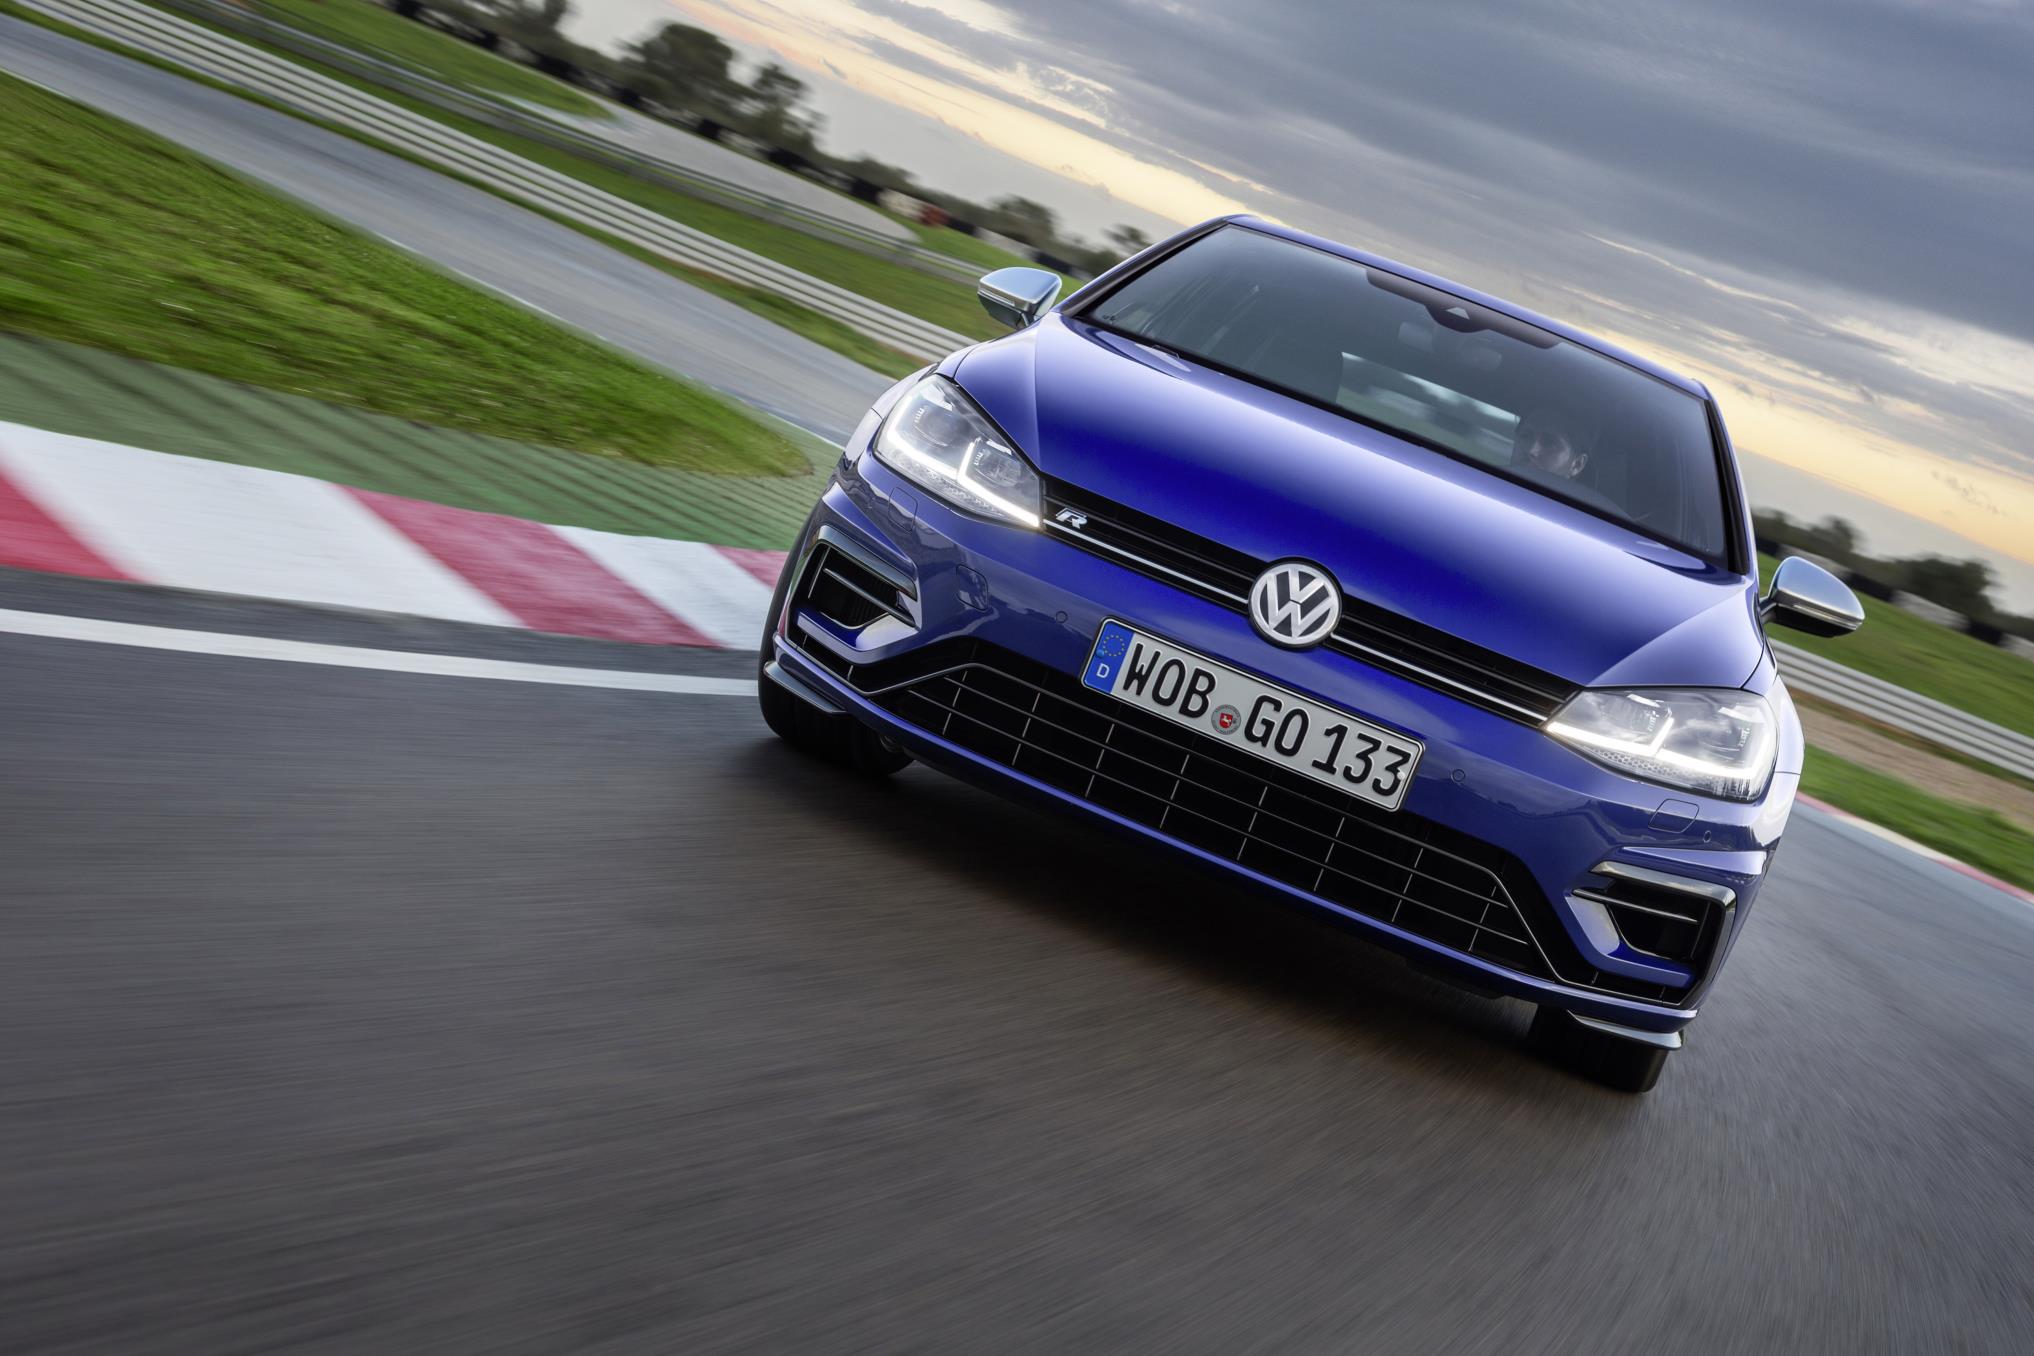 The Golf R's all-wheel-drive system makes it unstoppable in all conditions